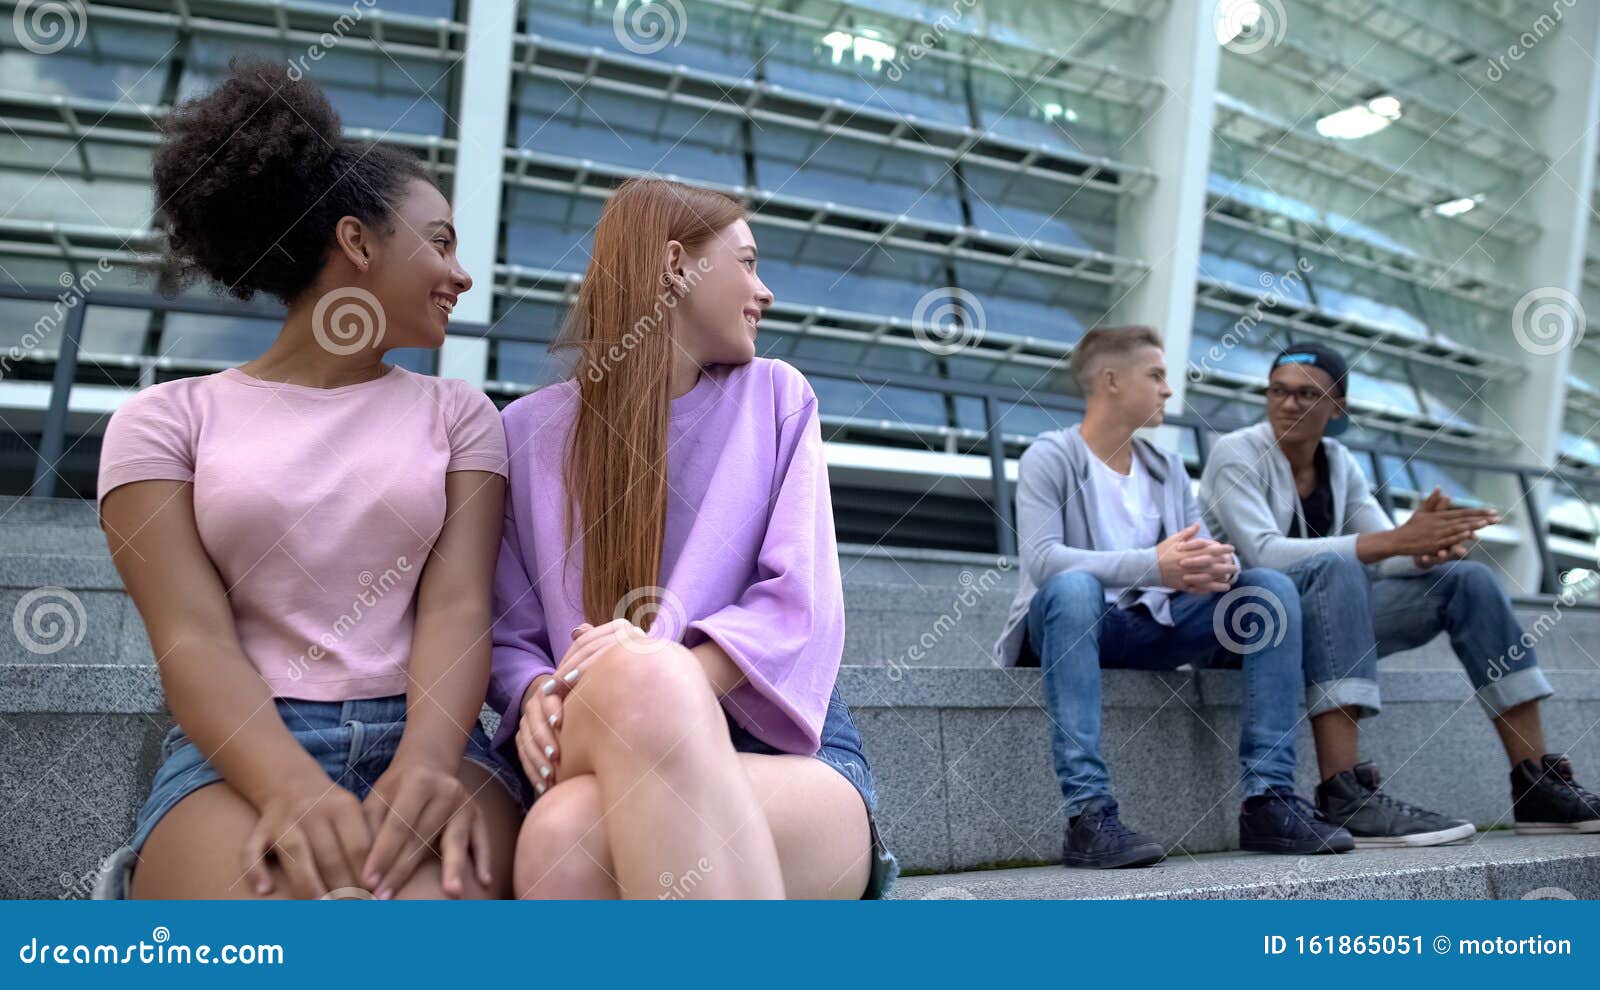 female teenagers looking at male students sitting stairs, first relations, flirt